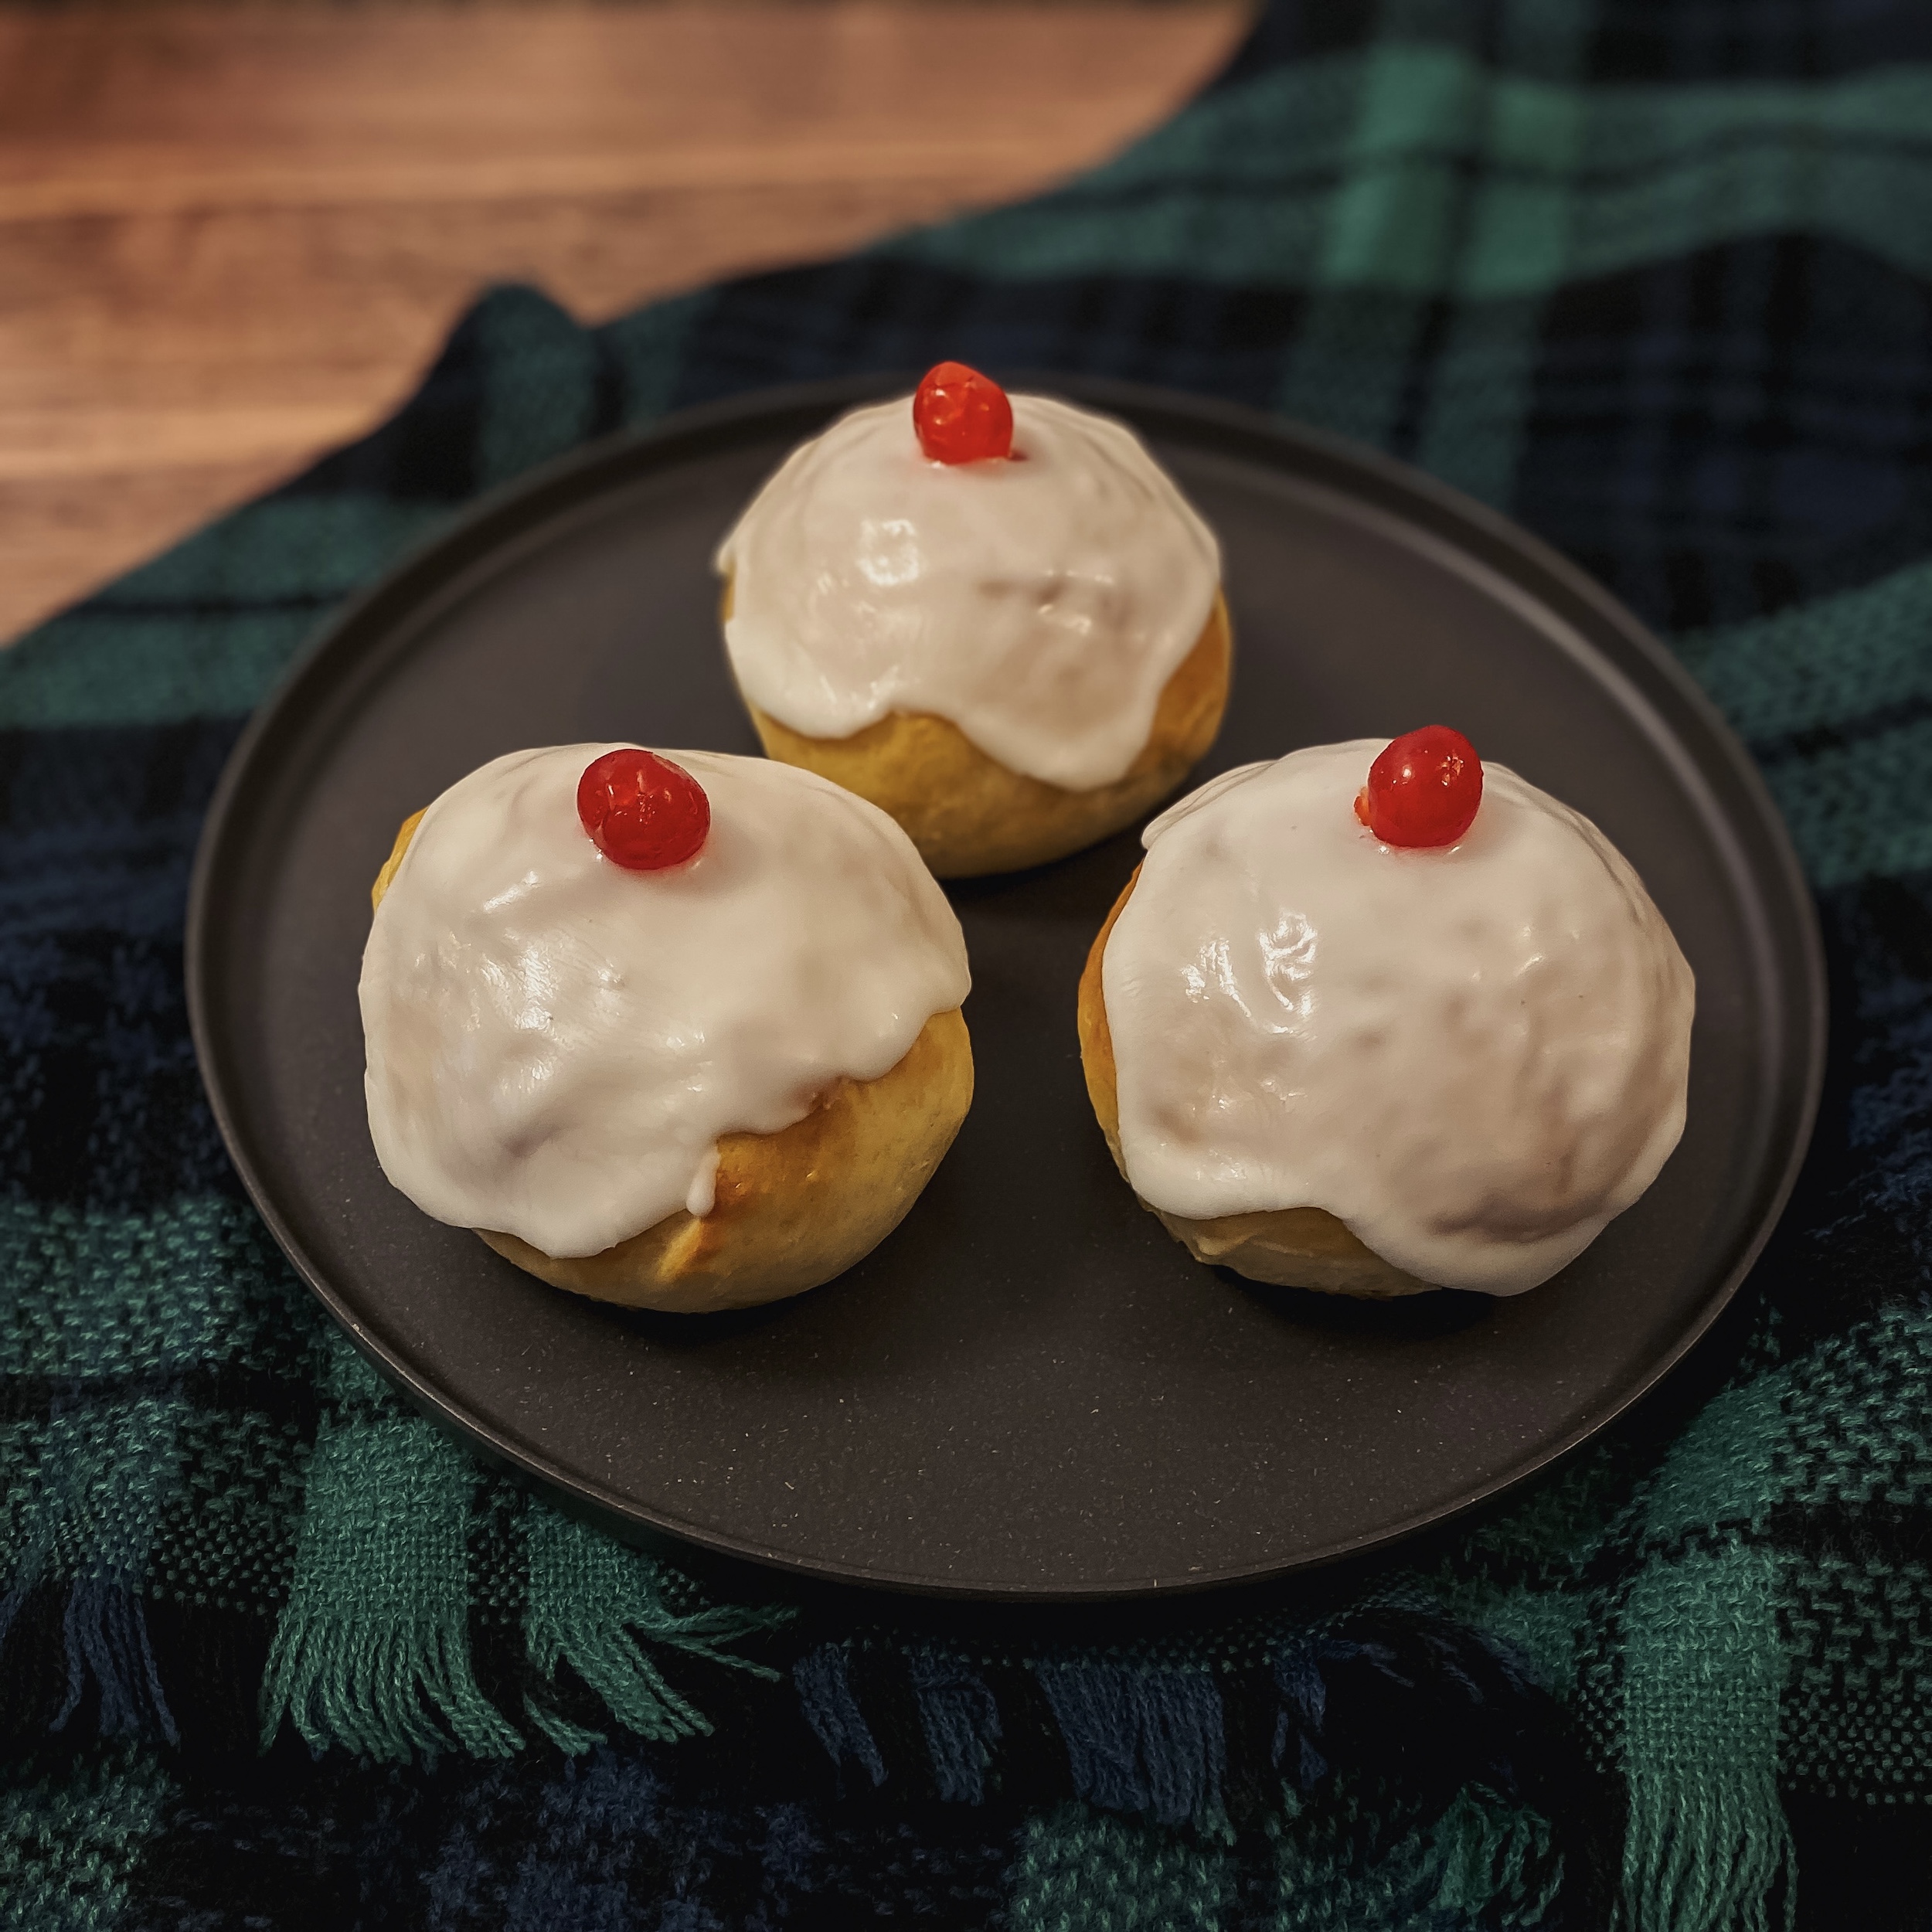 Brave Iced Buns (3 yeast buns with white icing and candied cherries) on a plate